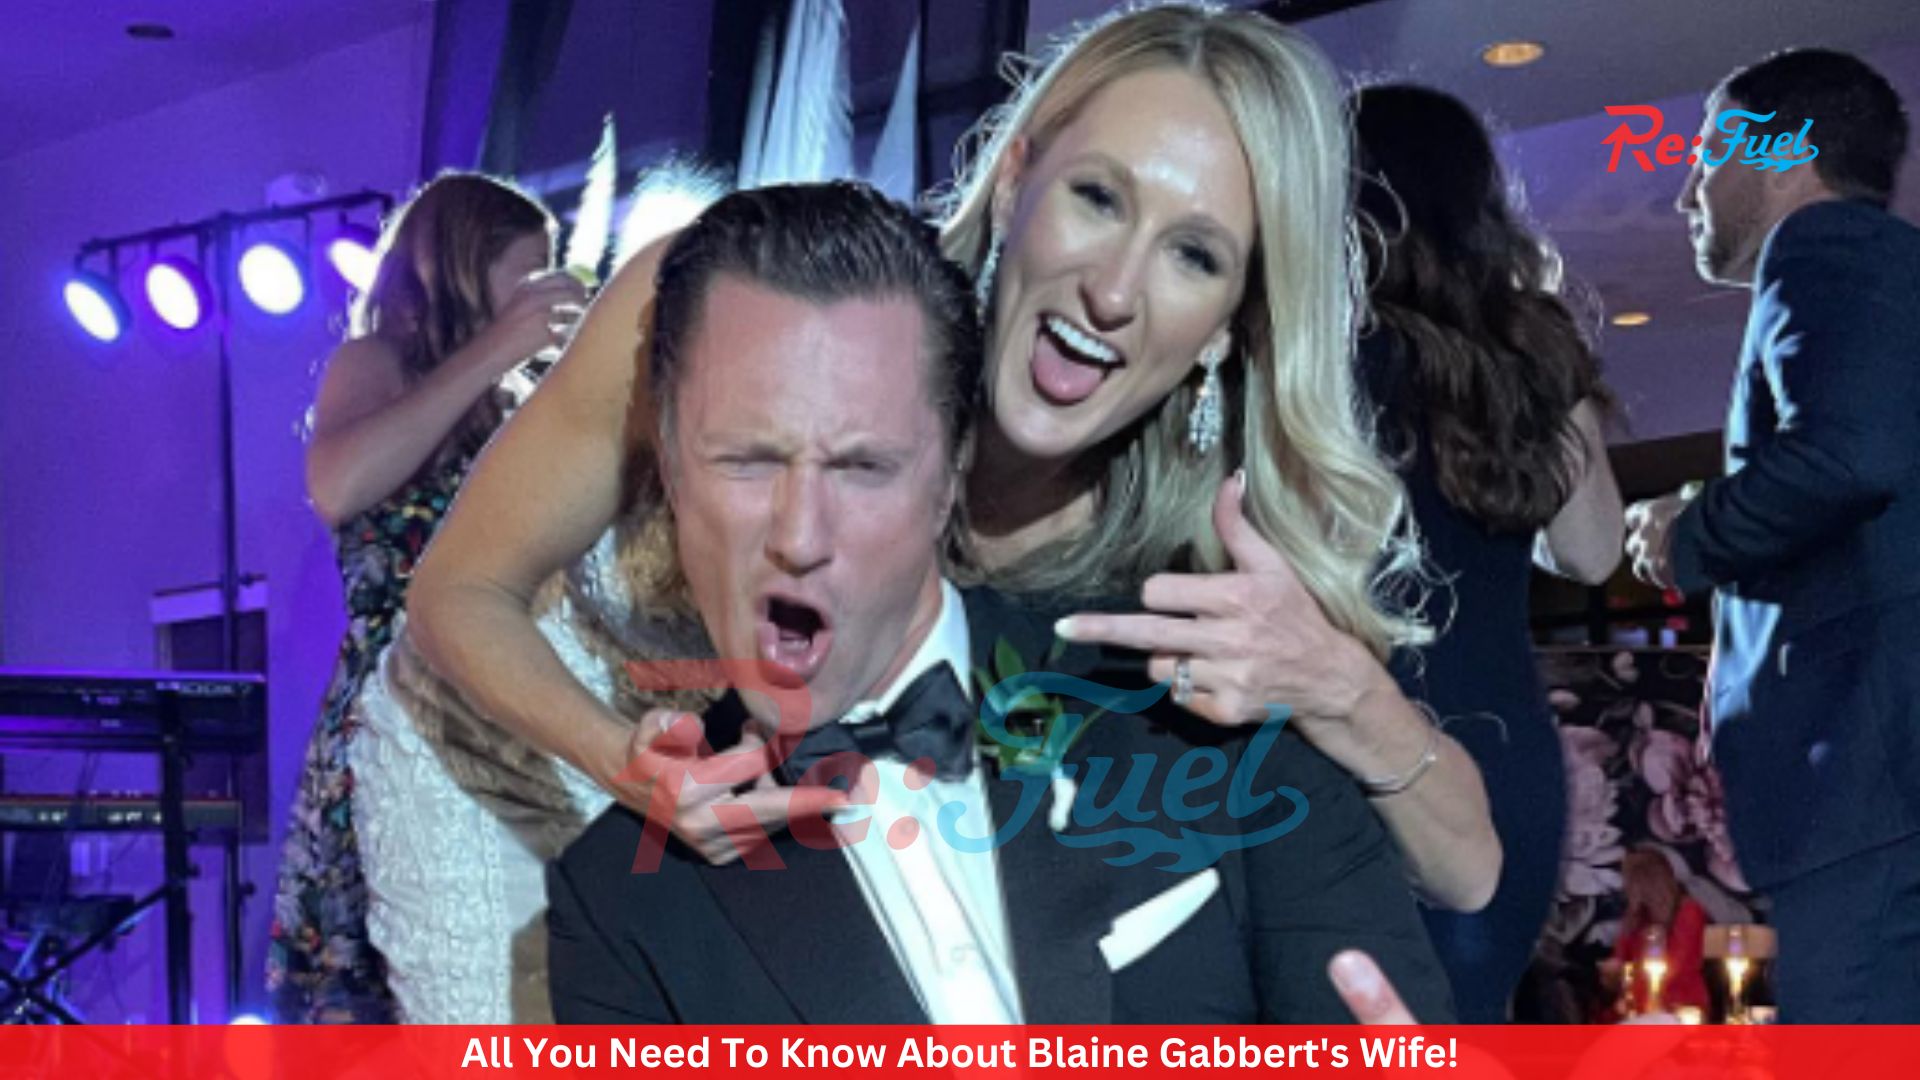 All You Need To Know About Blaine Gabbert's Wife!